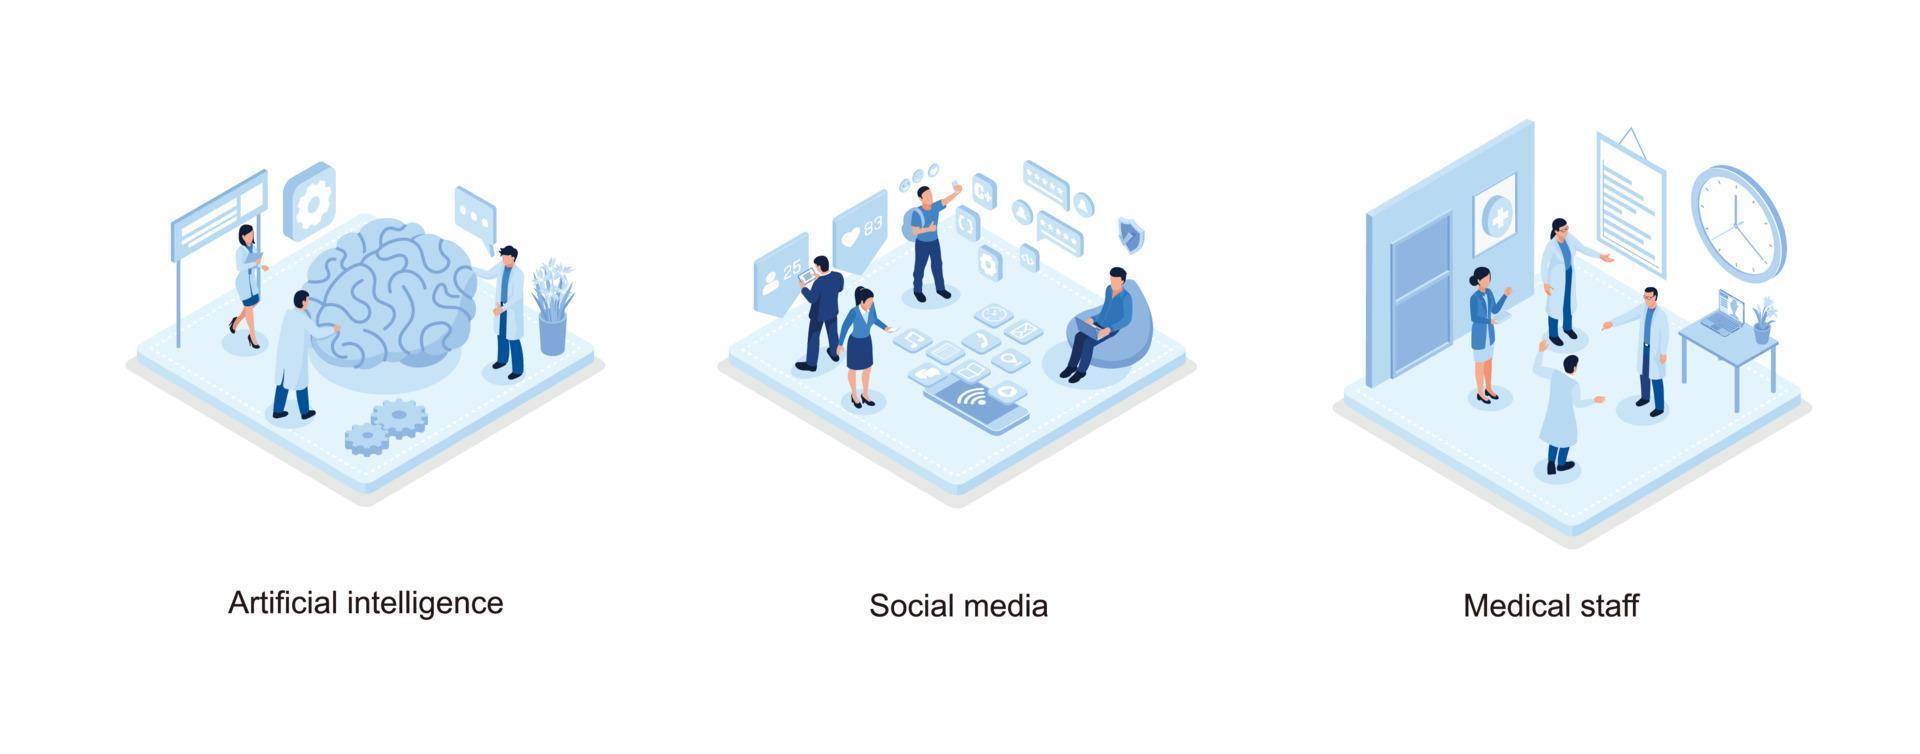 Artificial intelligence concept, People Characters standing near Smartphone and looking at new Social Media Post, Different medical staff characters, set isometric vector illustration